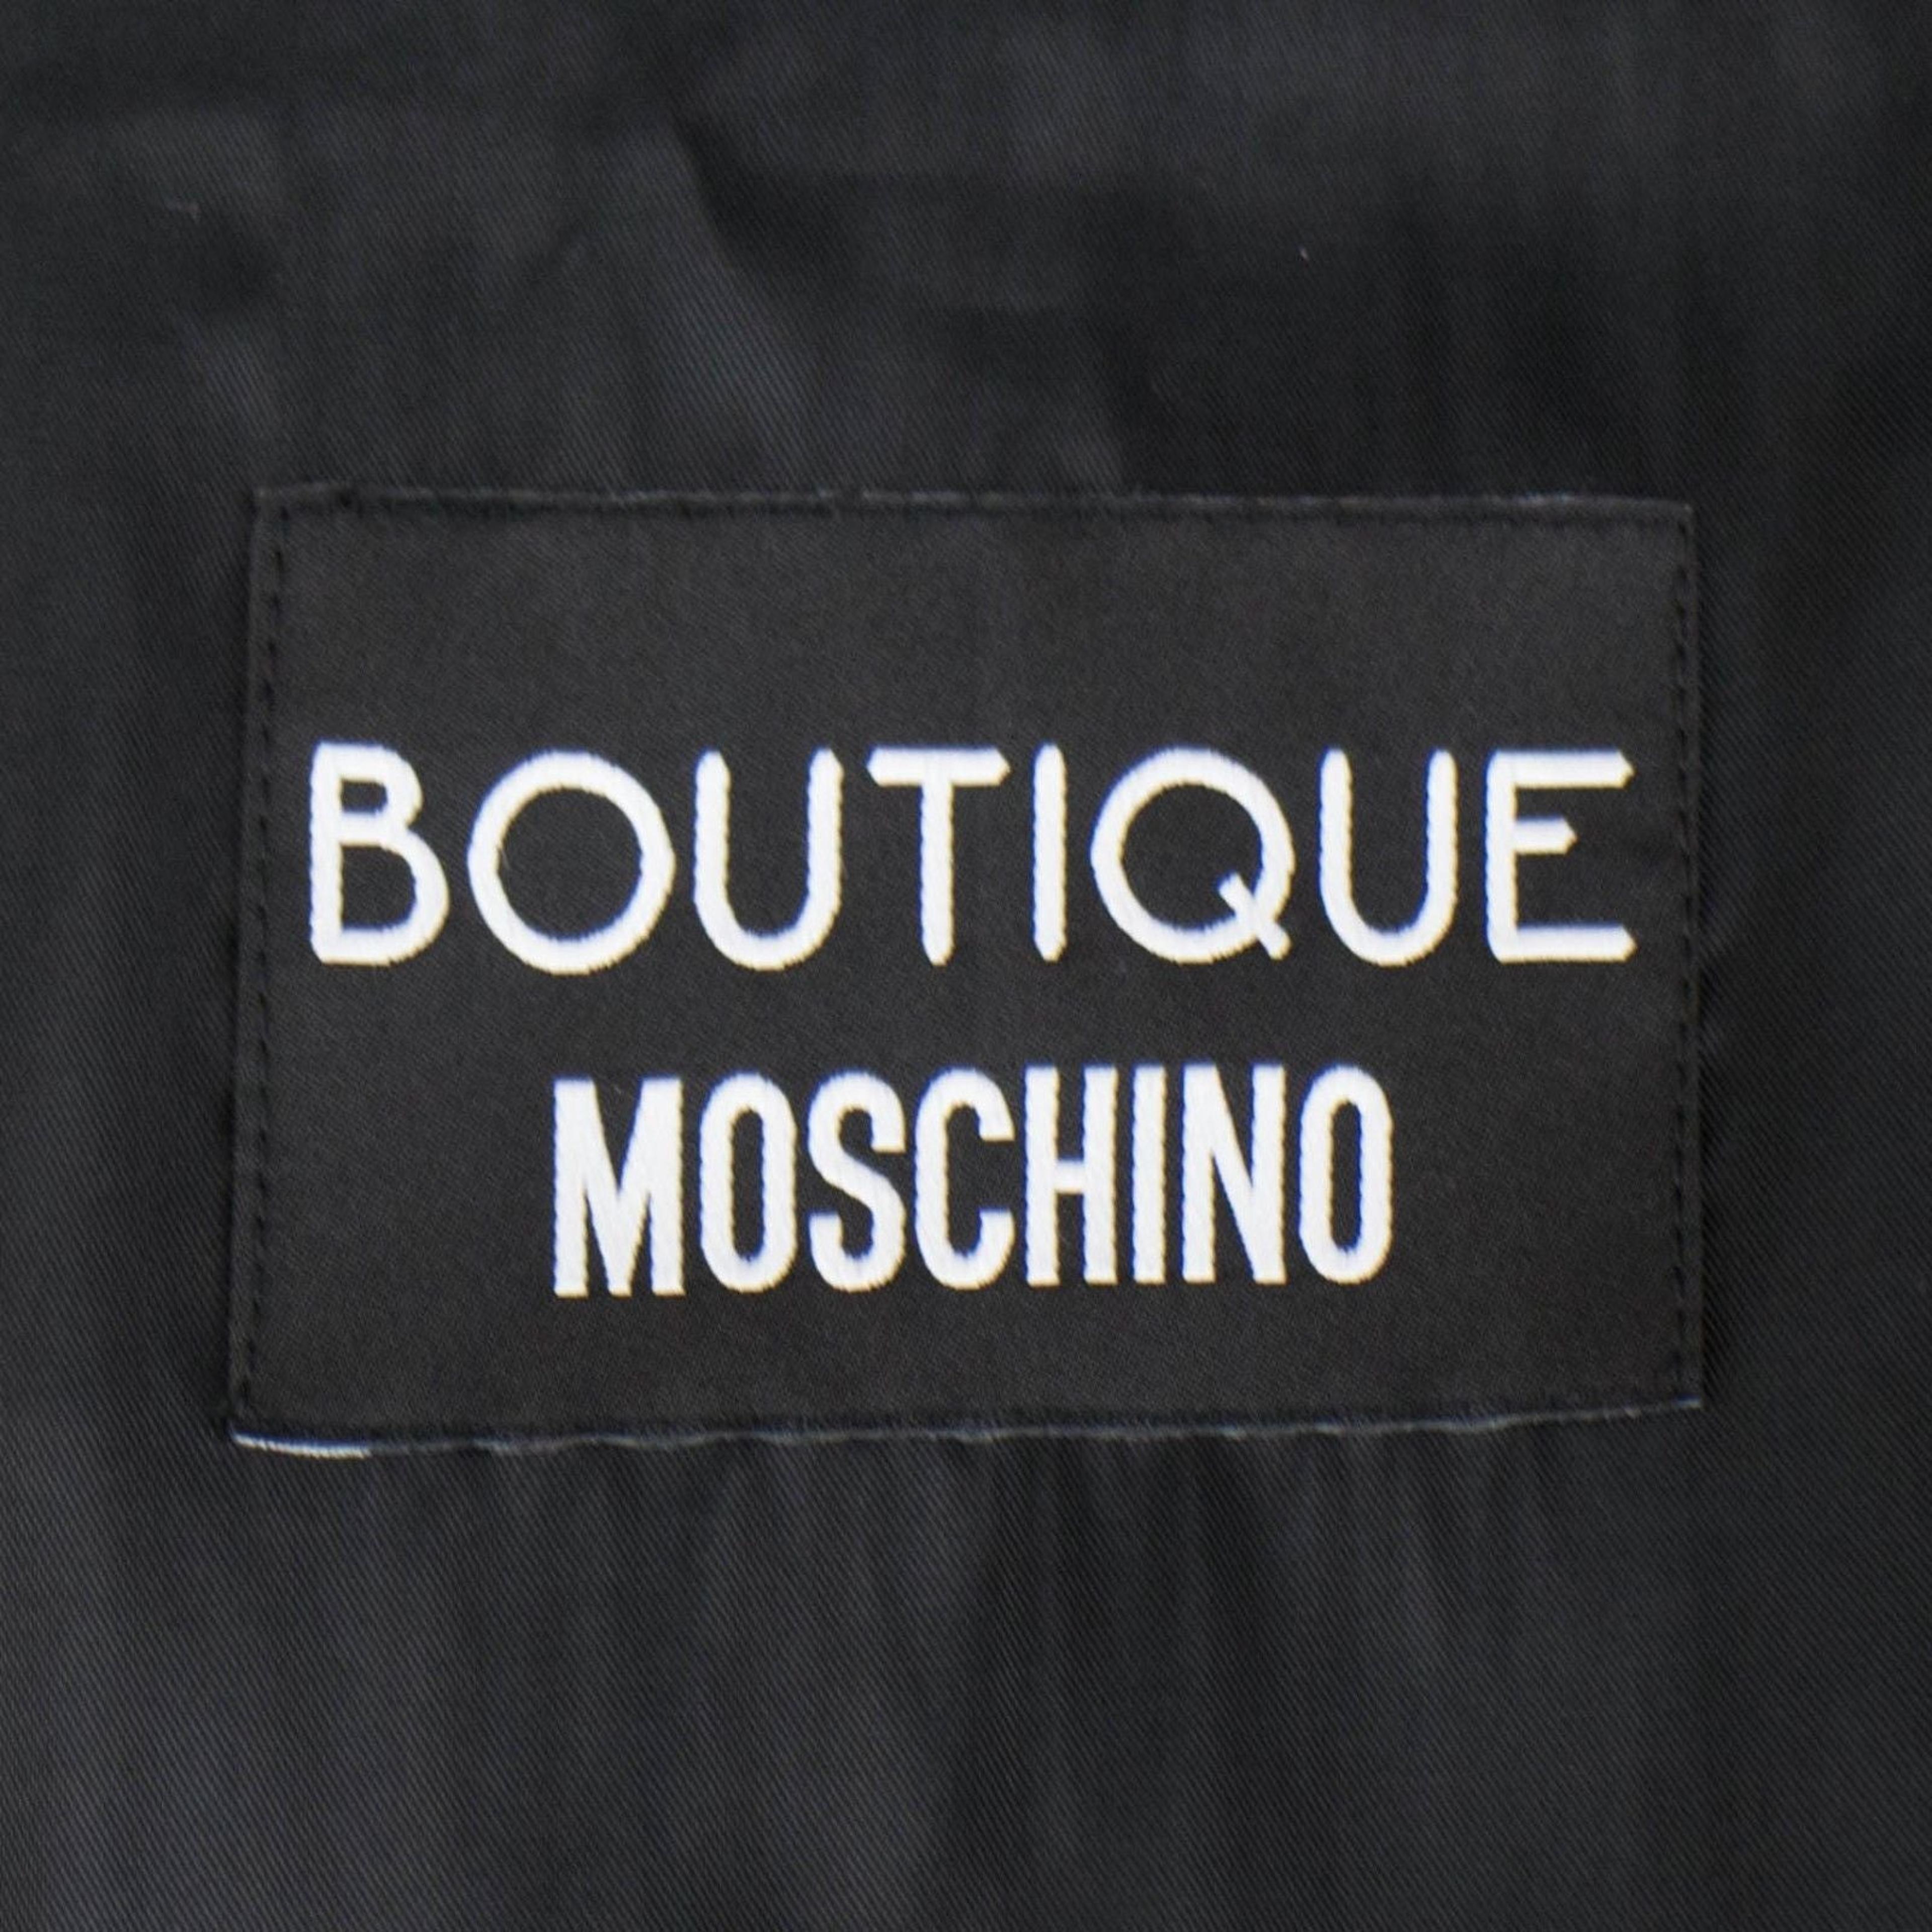 Alternate View 6 of MOSCHINO BOUTIQUE Women's Cuffed 3/4 Sleeve Black Jacket